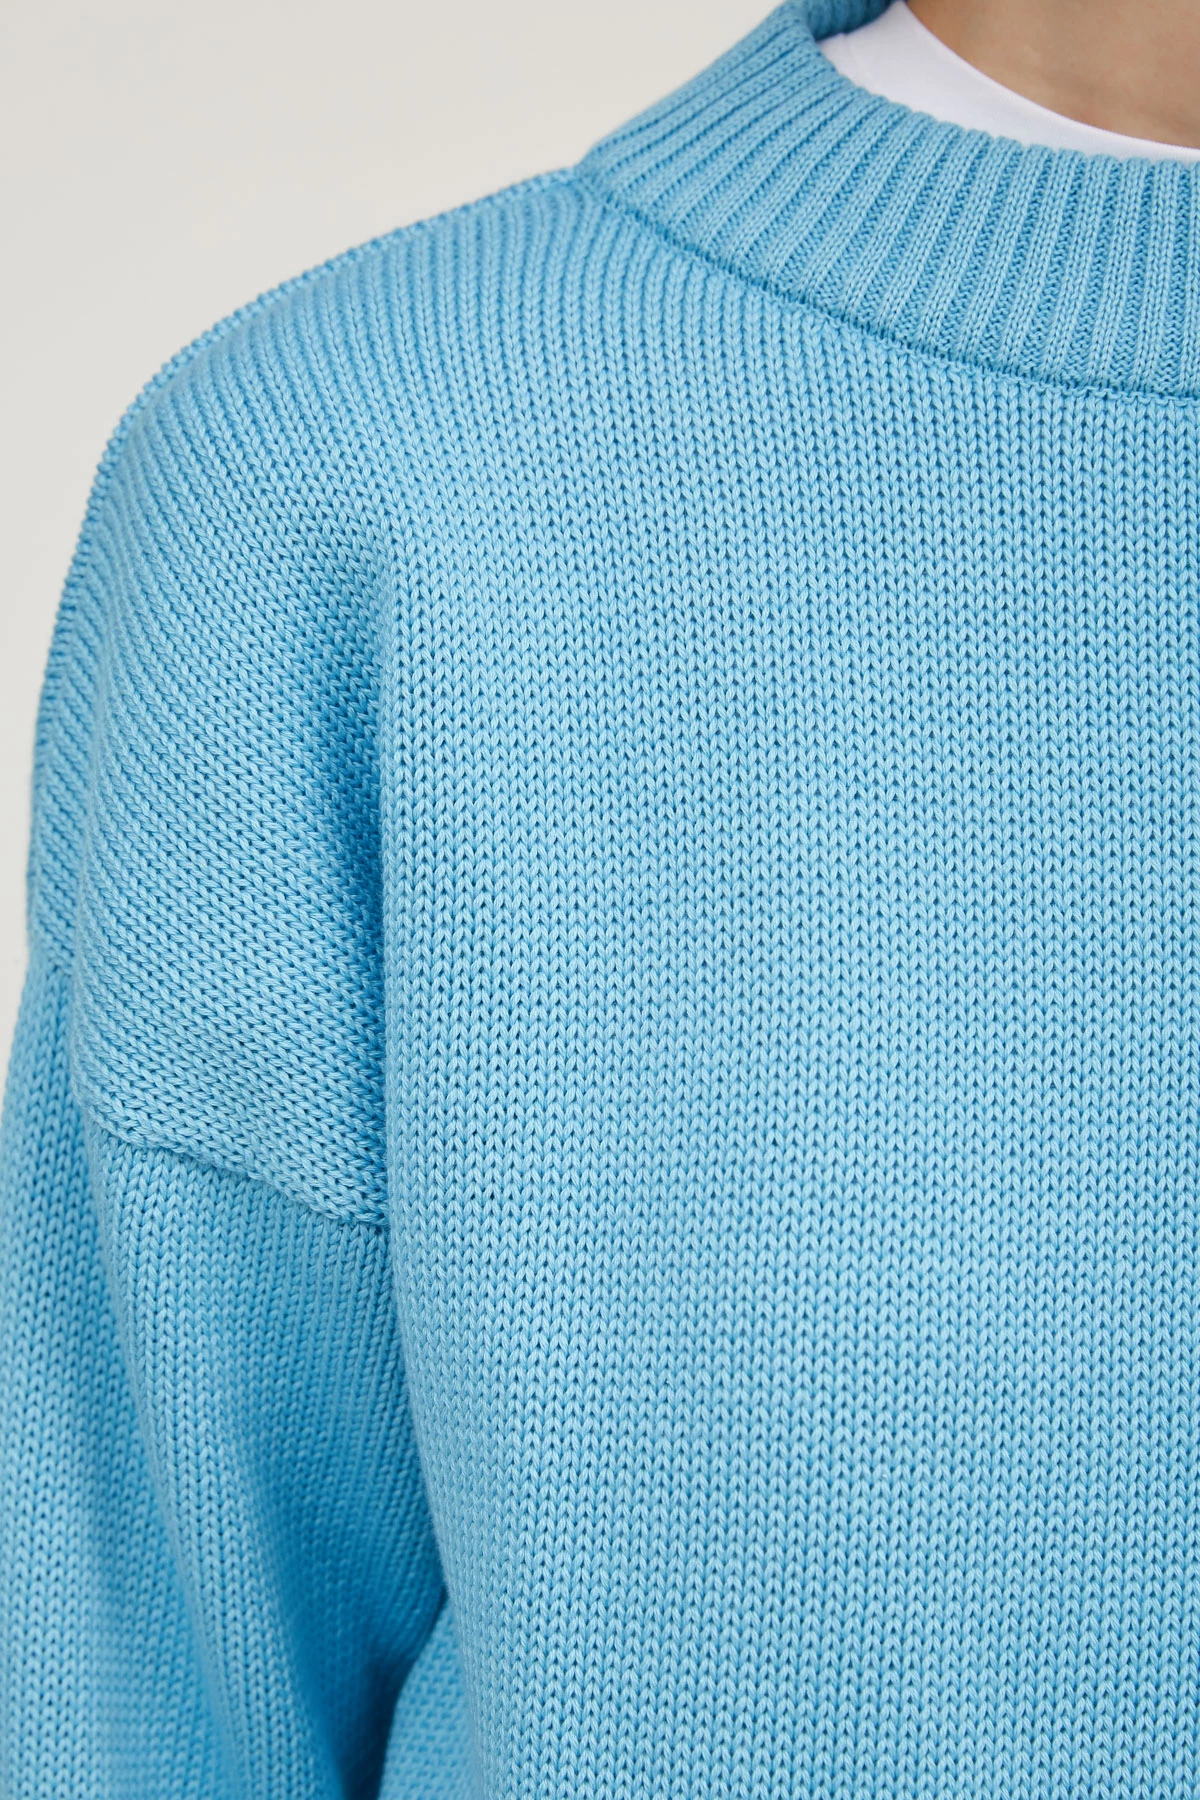 Blue knitted cotton sweater, photo 4